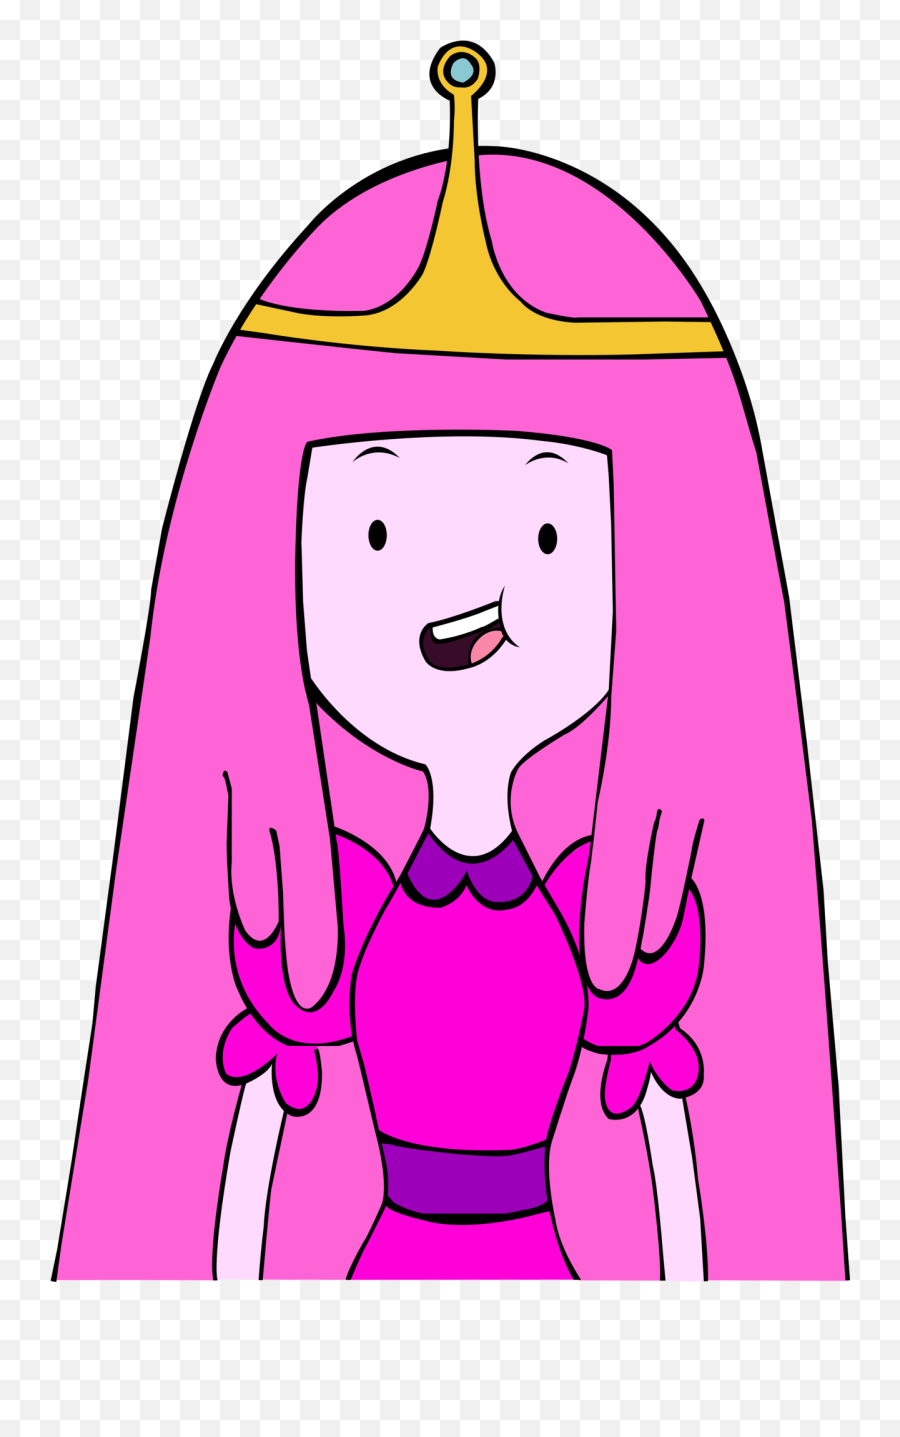 Download Free Png Hd Adventure Time Clipart Princess - Adventure Time Princess Bubblegum,Adventure Time Transparent